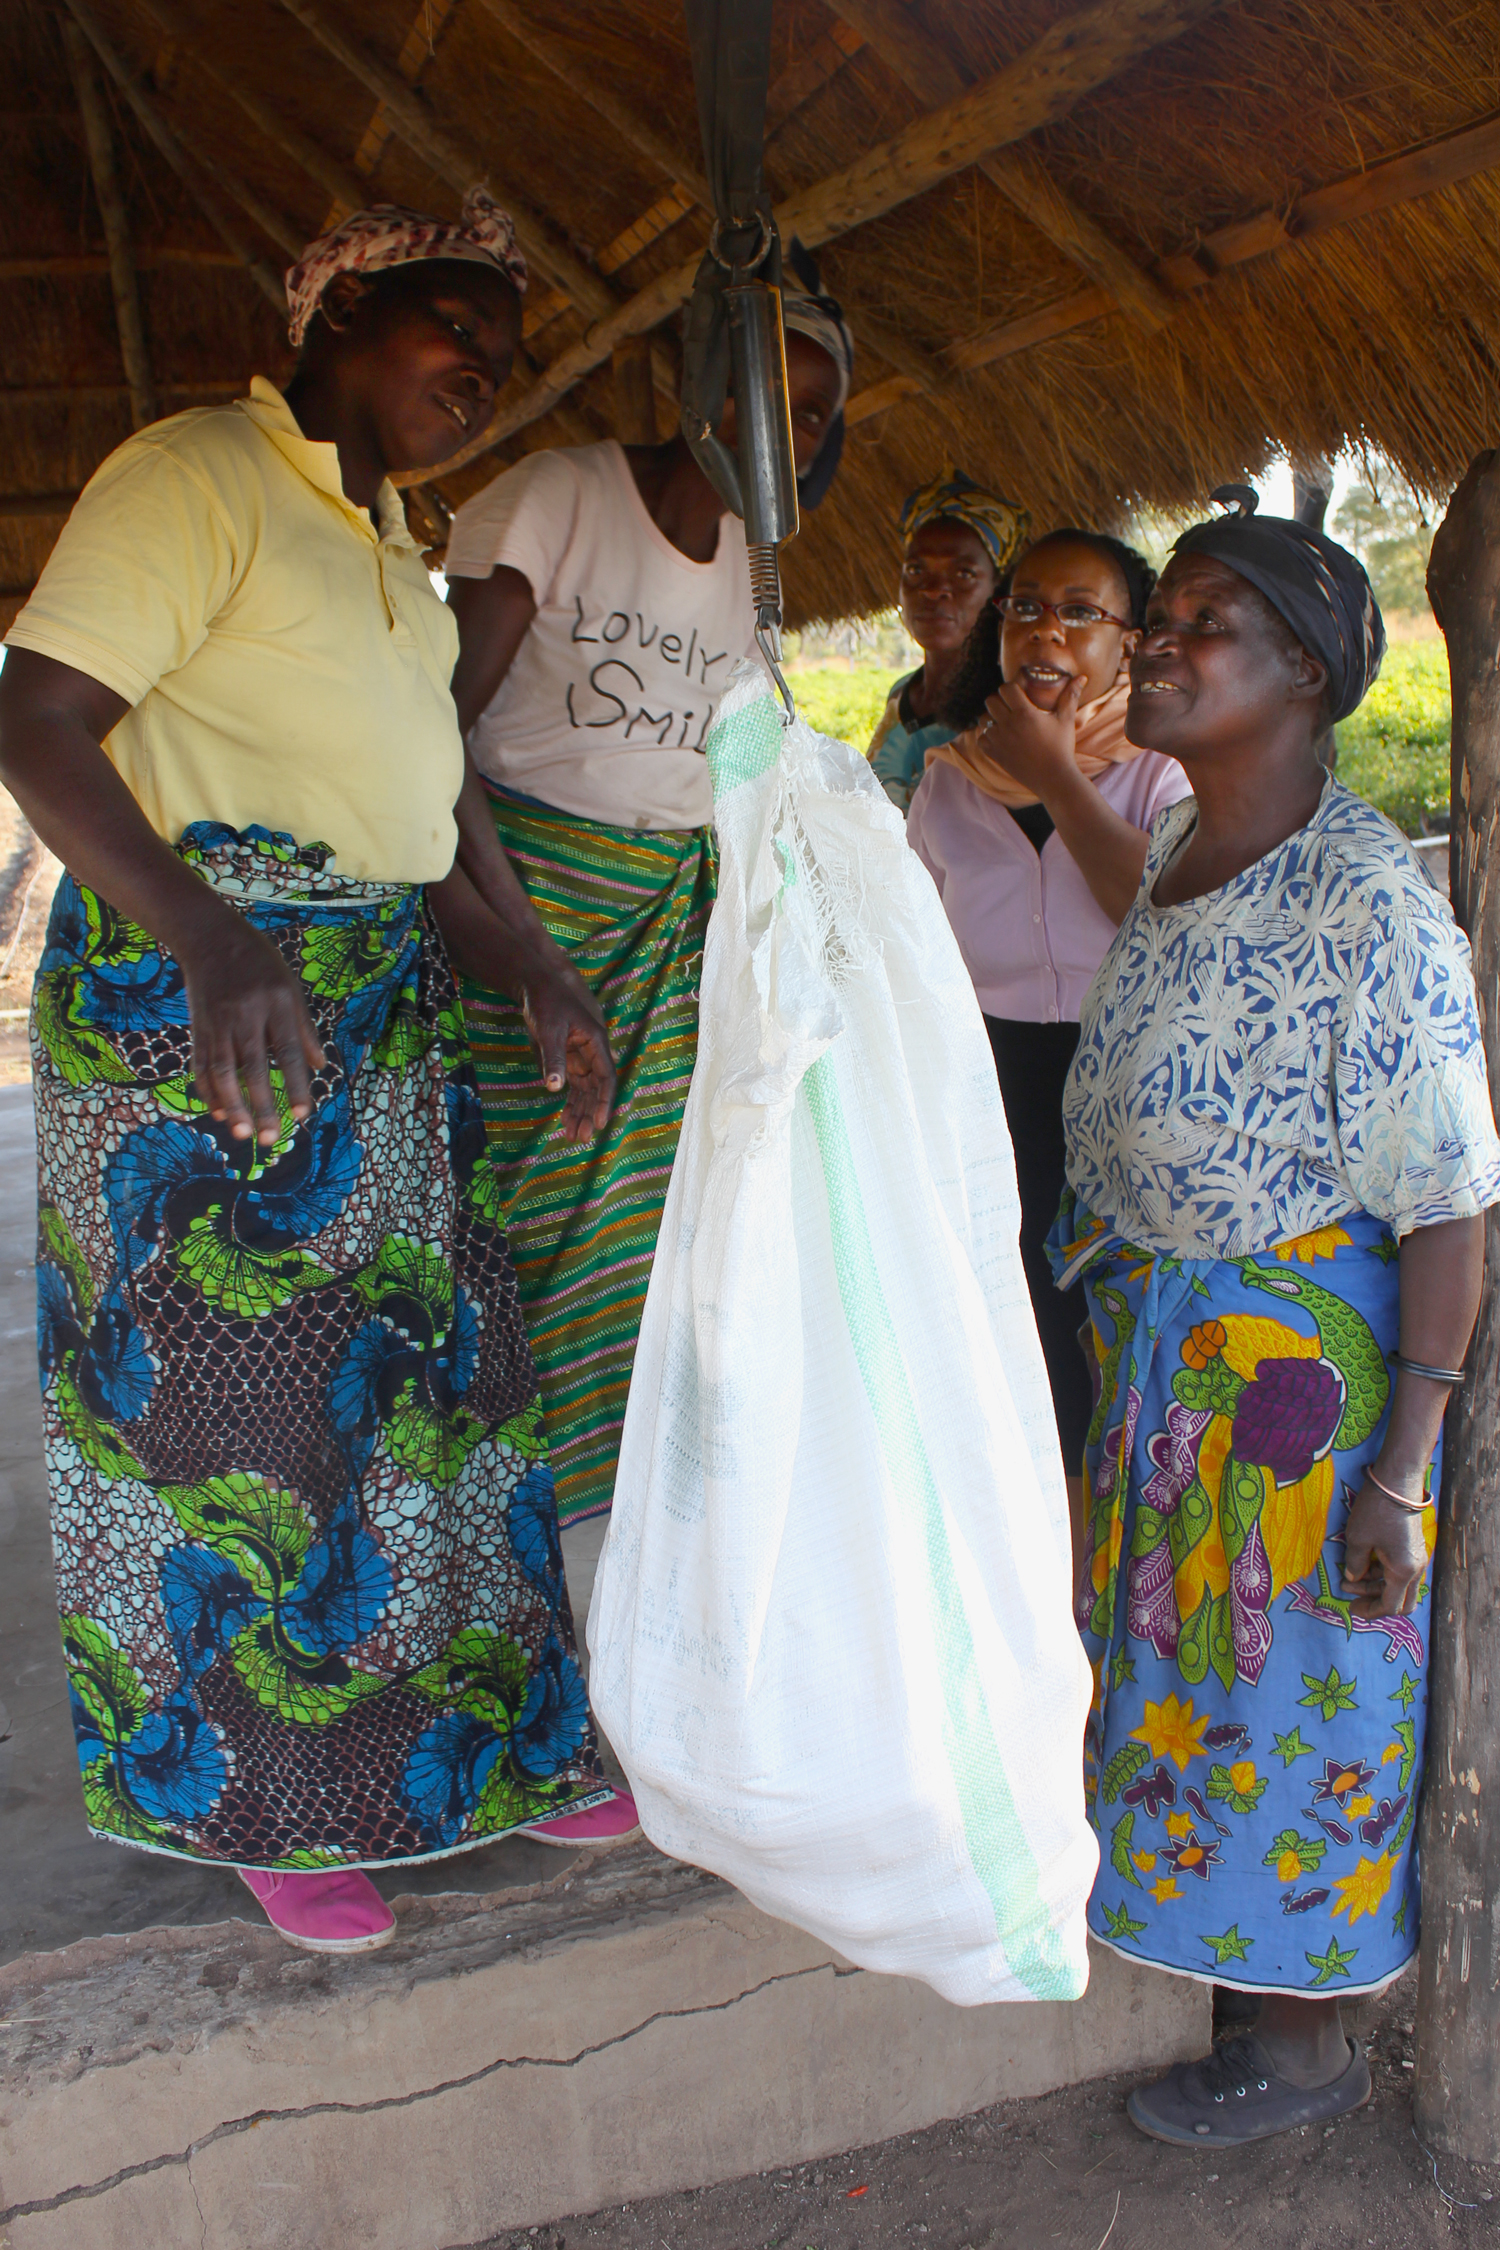 Women farmers and a buyer gather around a scale and bag of produce to discuss prices.